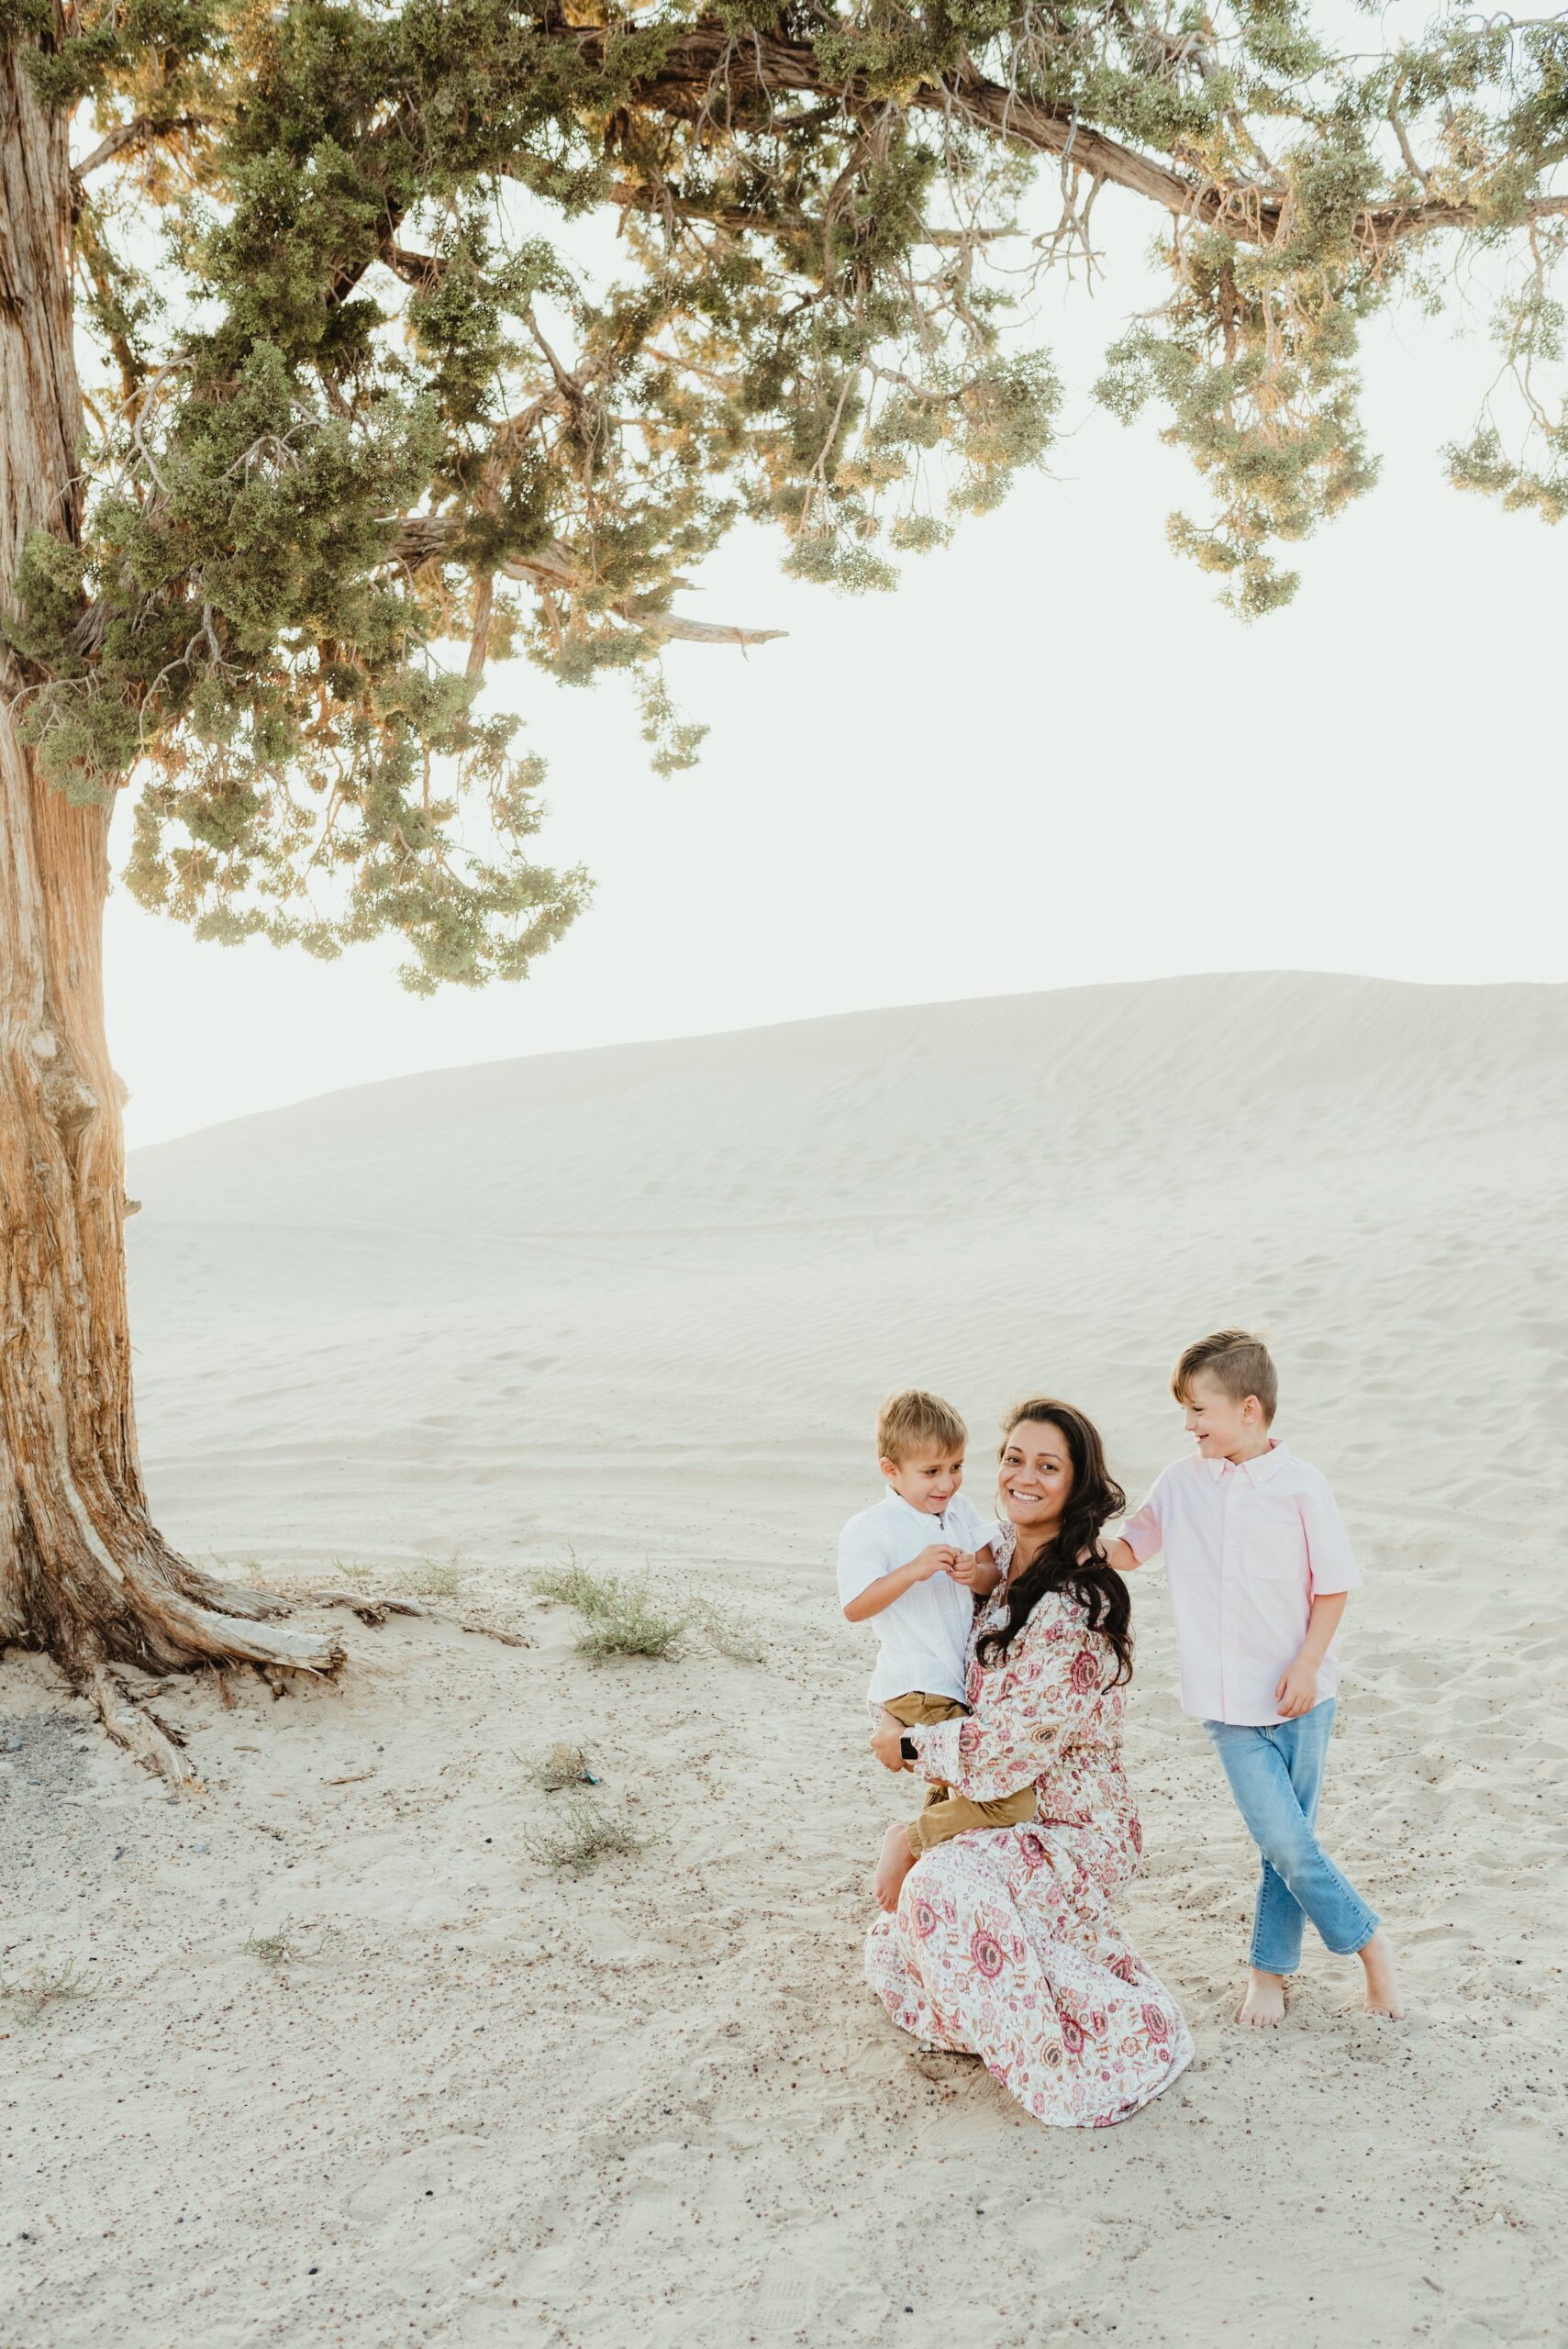 Little Sahara Sand Dunes. Beautiful photos of mom and her sons photographed by Stephanie Lorraine Photography.